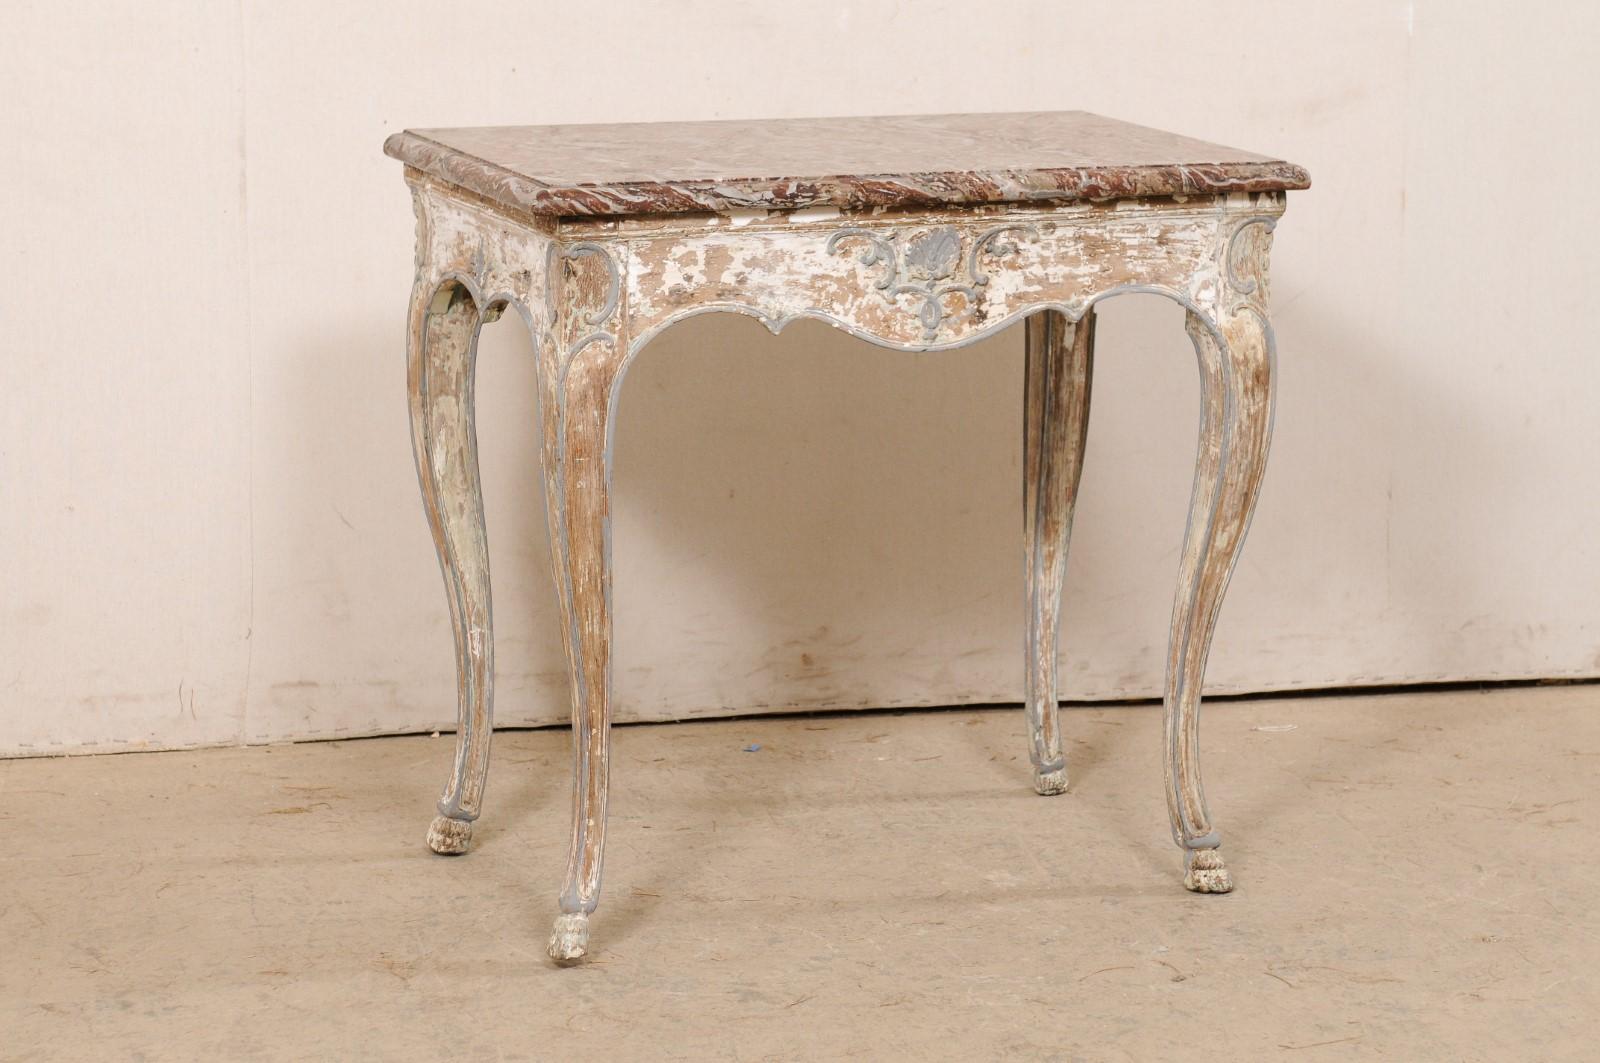 A French smaller-sized console table, with its original marble top, from the 18th century. This antique table from France features its original marble top, in beautiful hues of merlot and gray, supported atop a carved wood base with scalloped